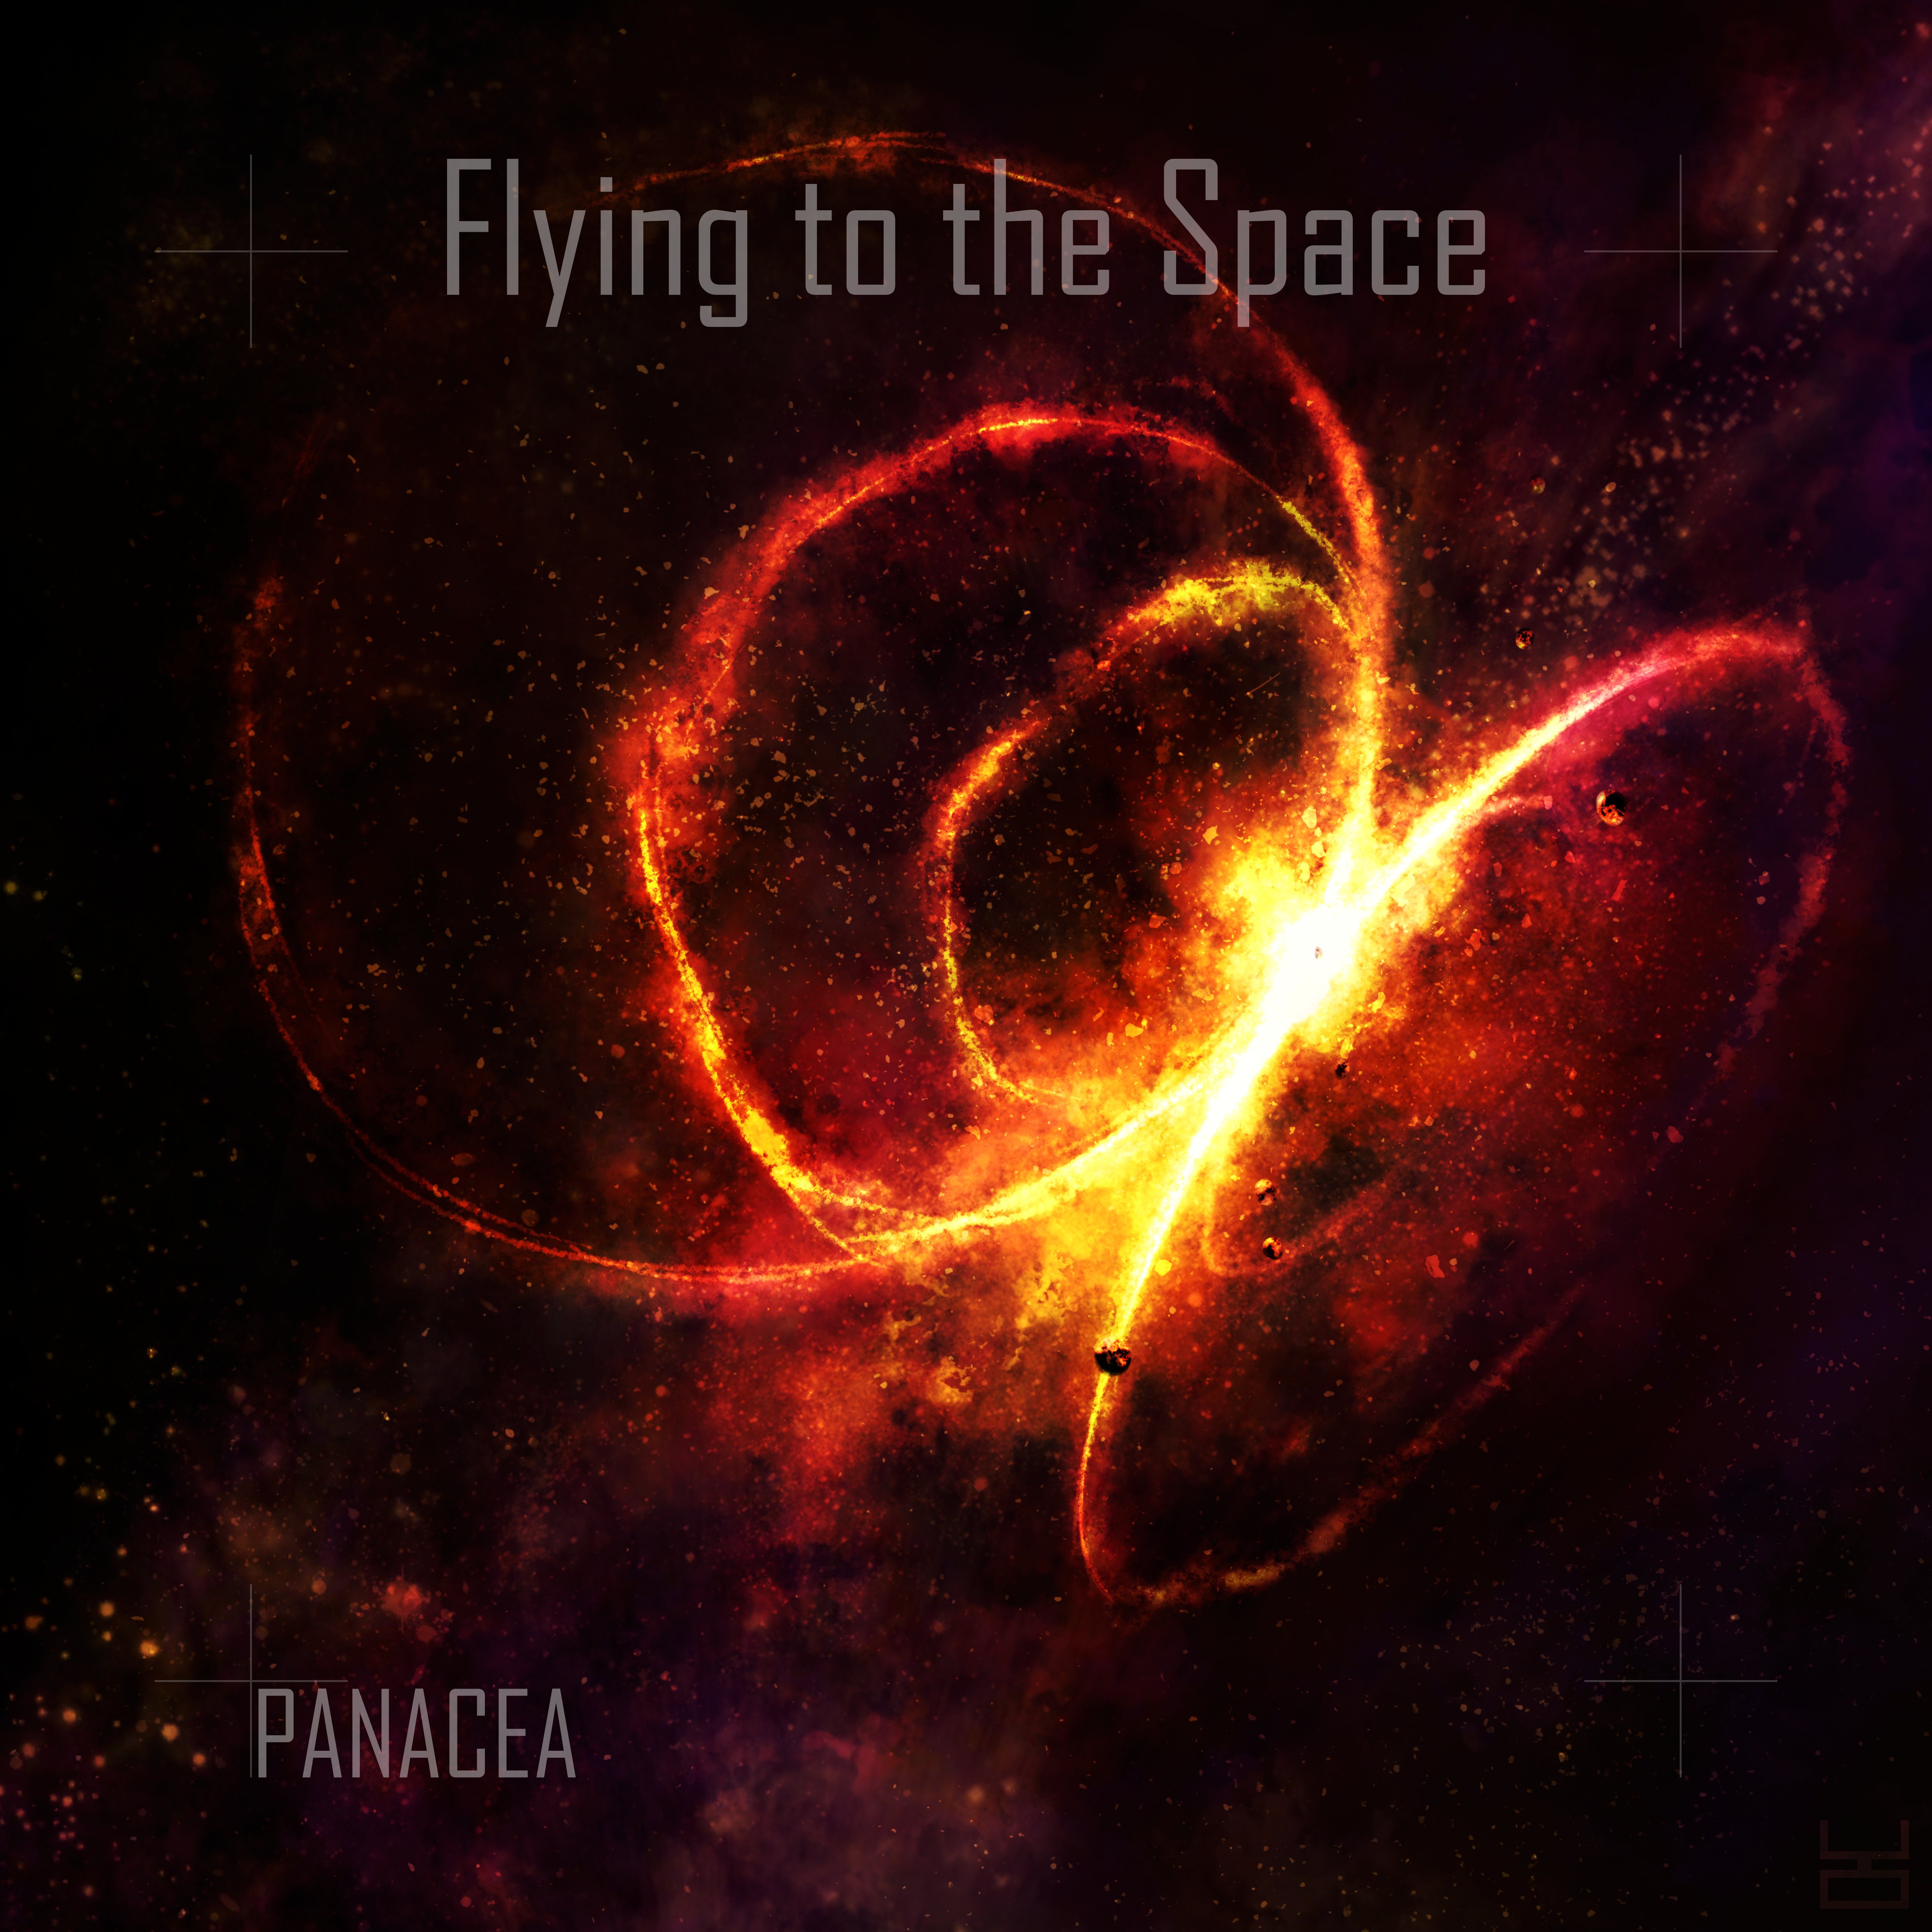 Fly to space. Neospace - Flying to the Stars (2022) картинки. Музыка похожие Cosmic.